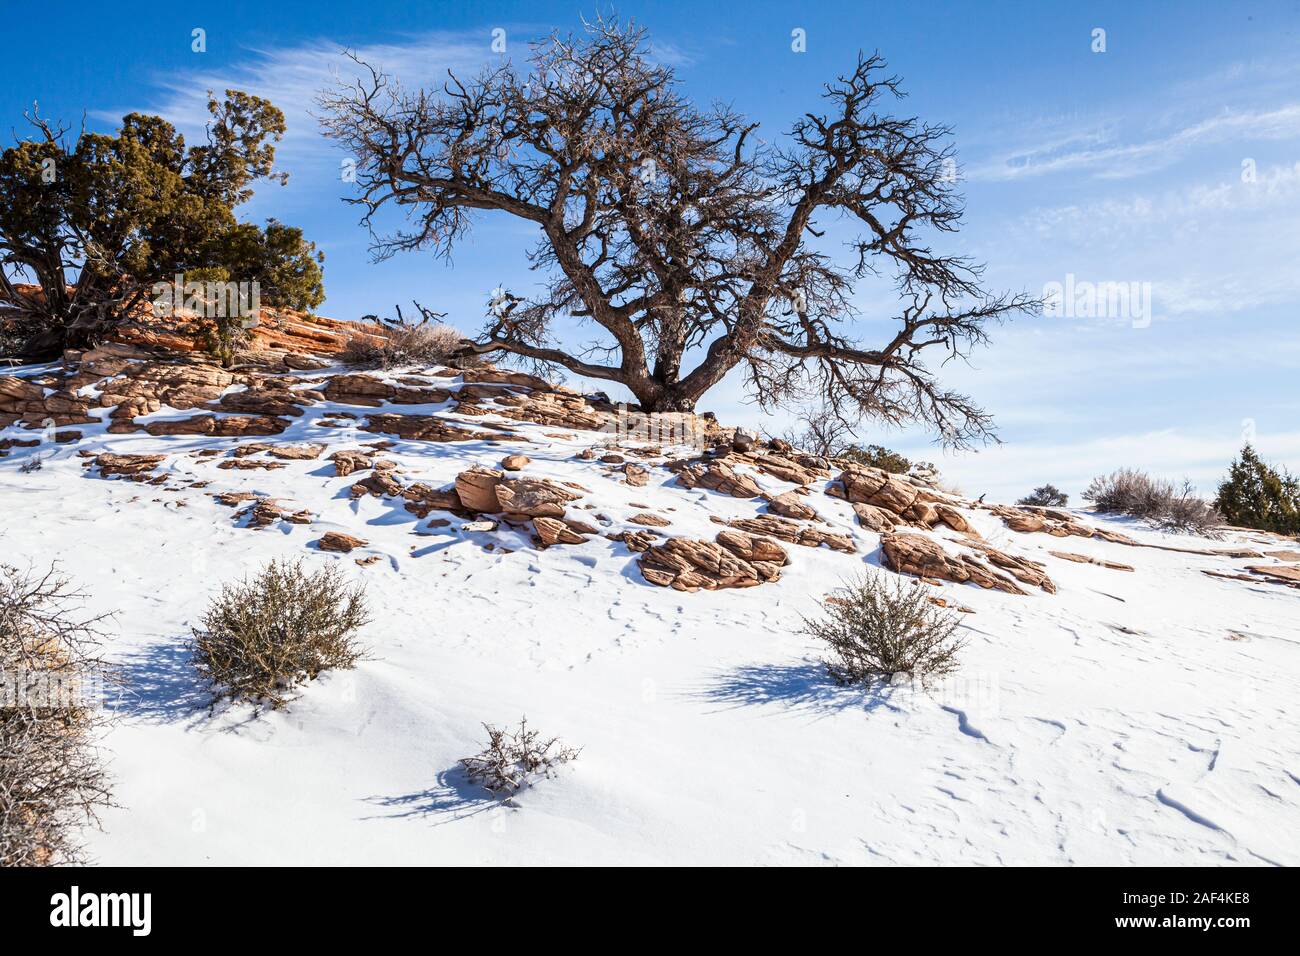 An old tree growing on a snow covered rocky hill under a clear blue sky, Canyonlands National Park, Island in the Sky, Utah, USA. Stock Photo